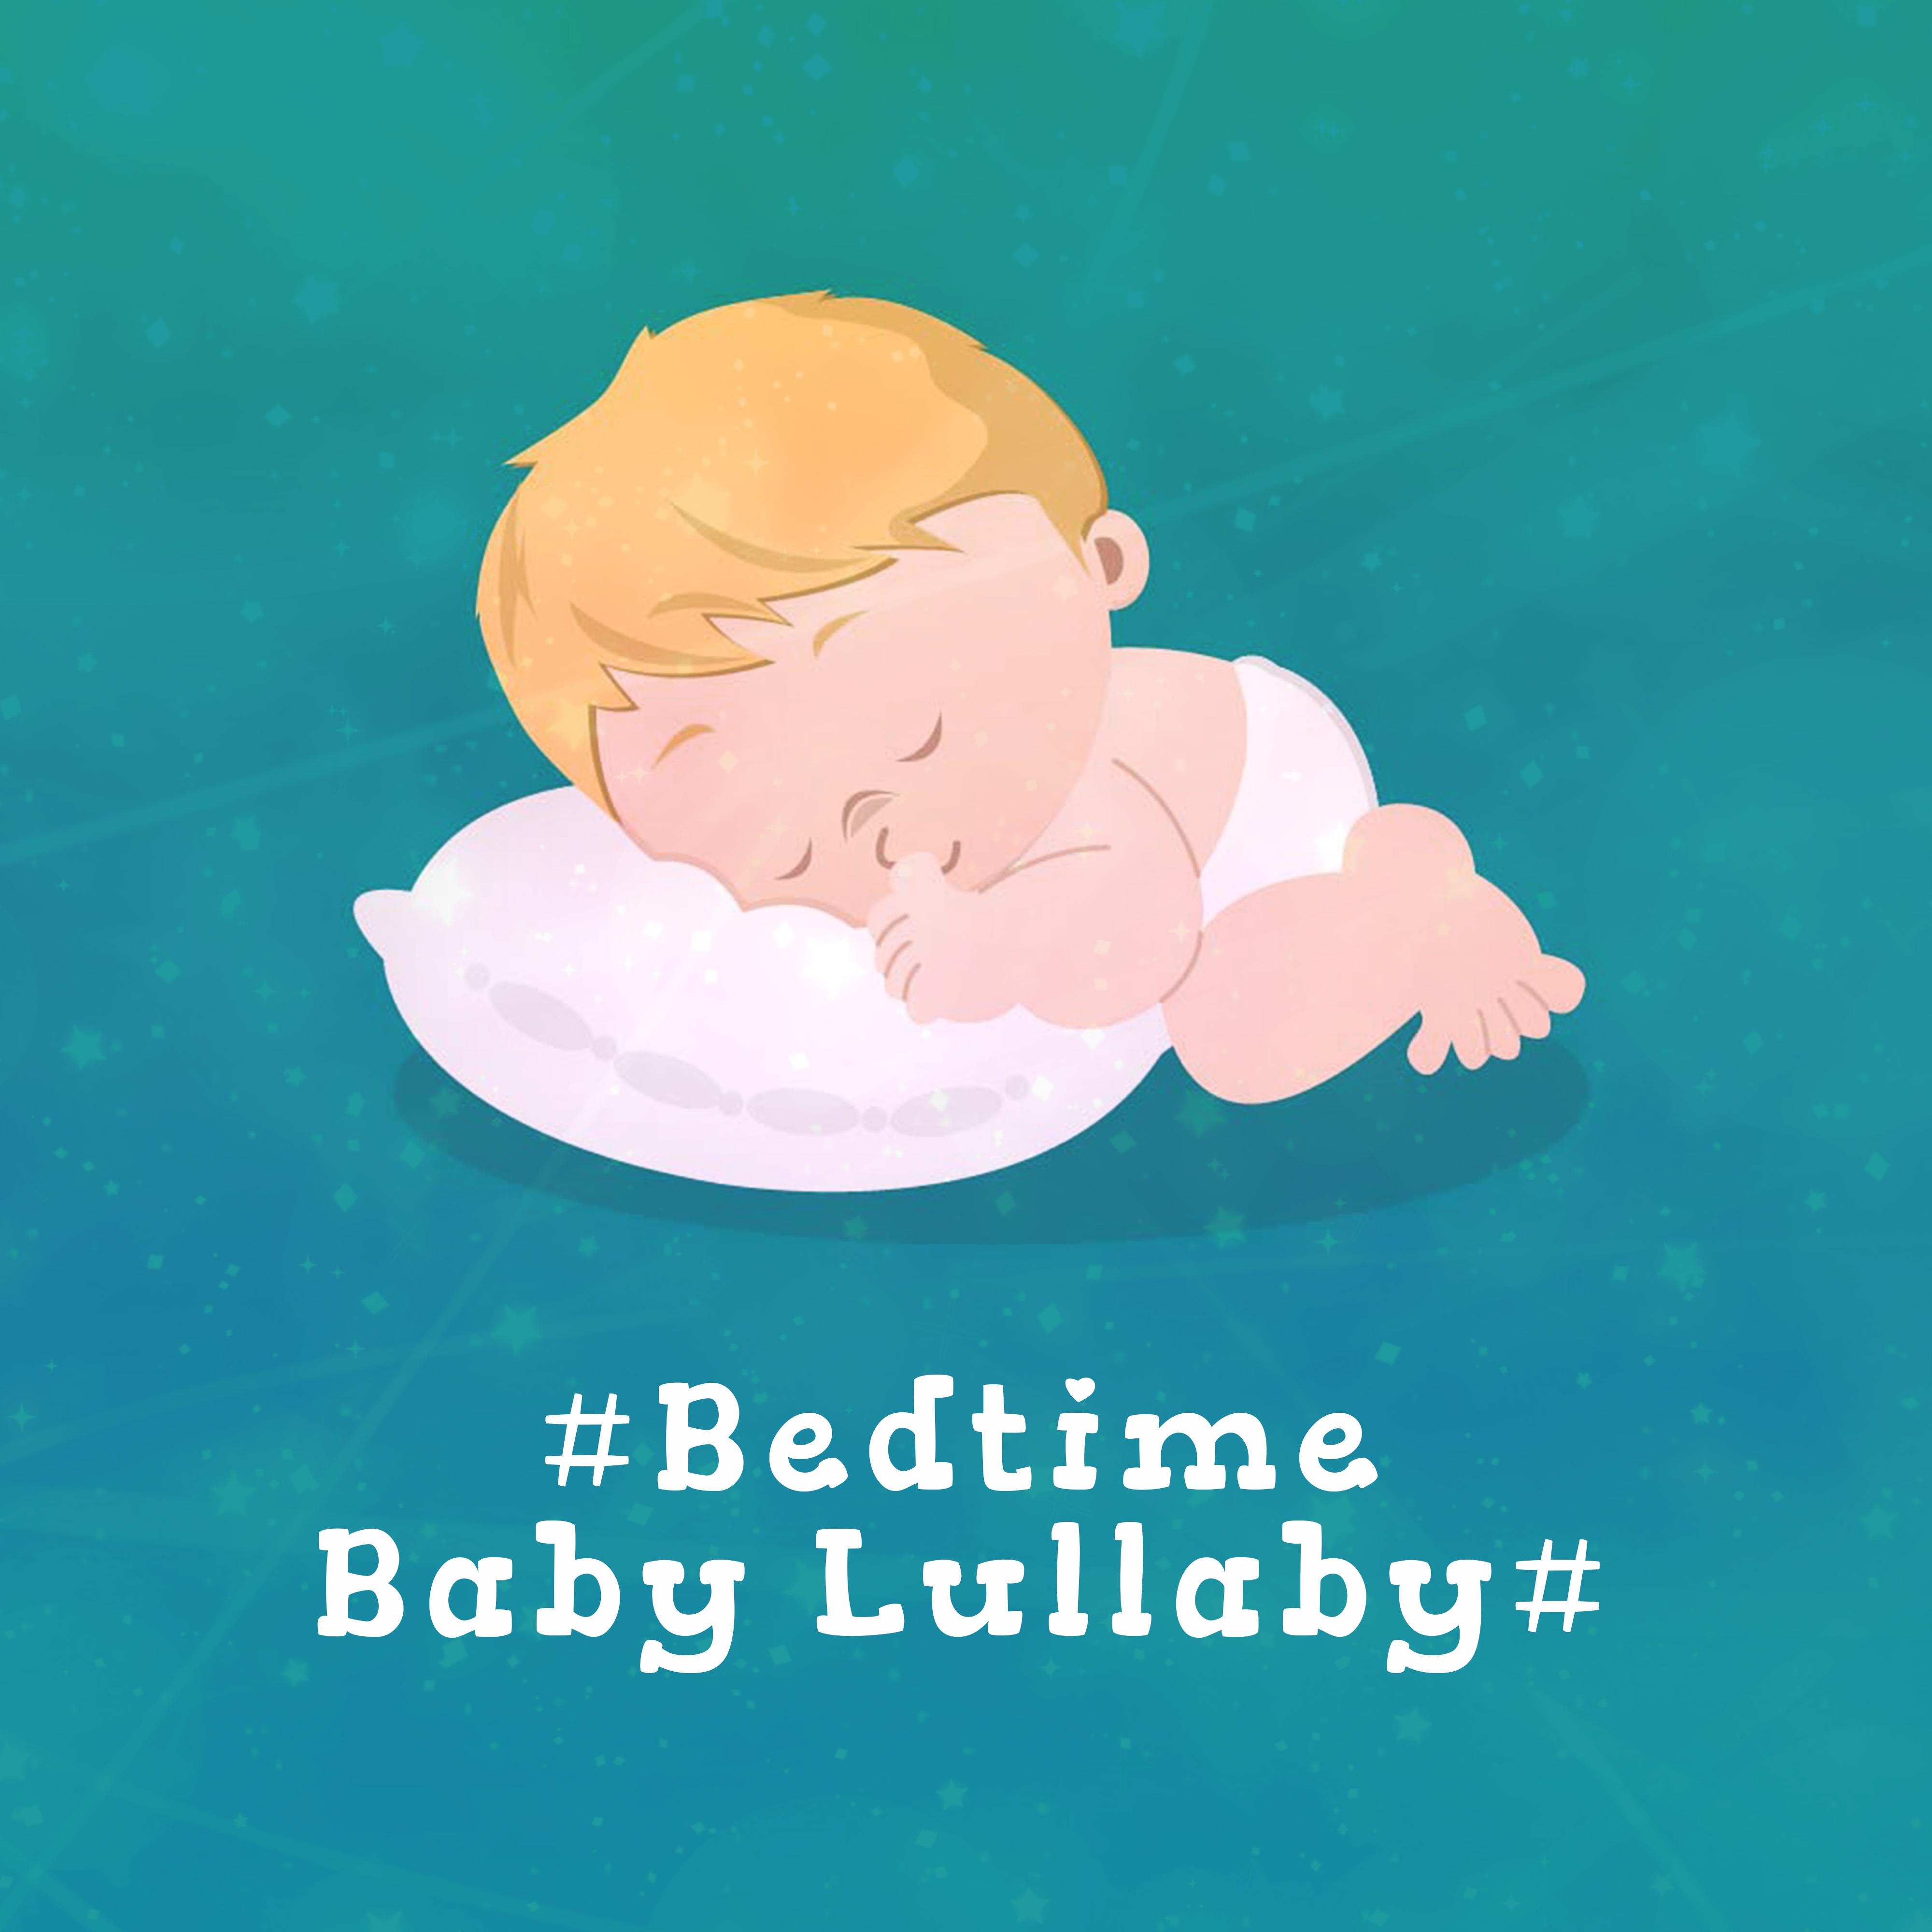 #Bedtime Baby Lullaby#